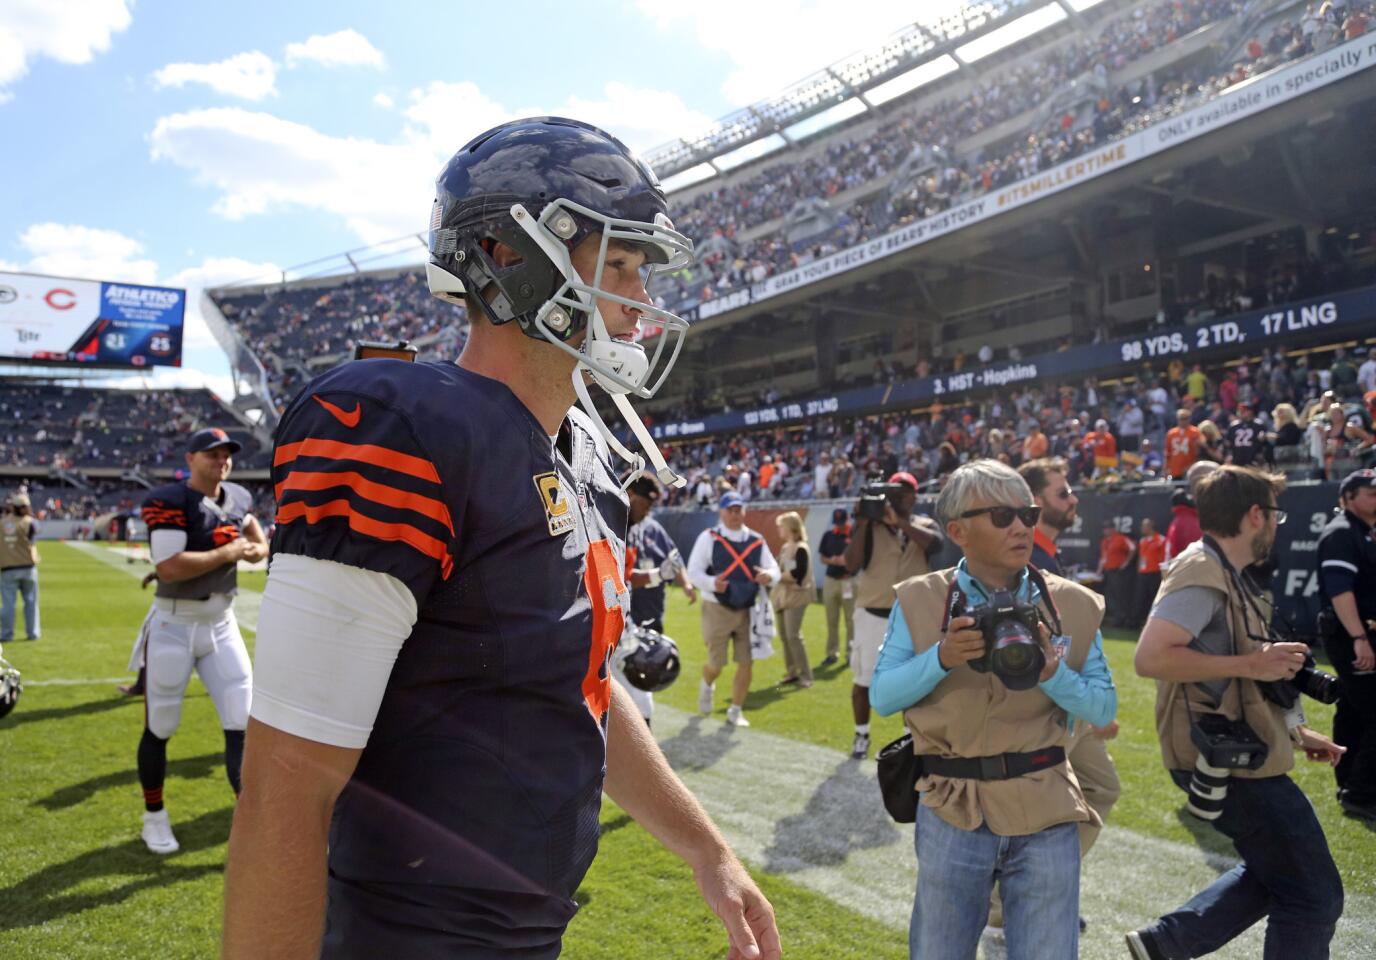 Jay Cutler walks off the field after his team's loss to the Green Bay Packers.